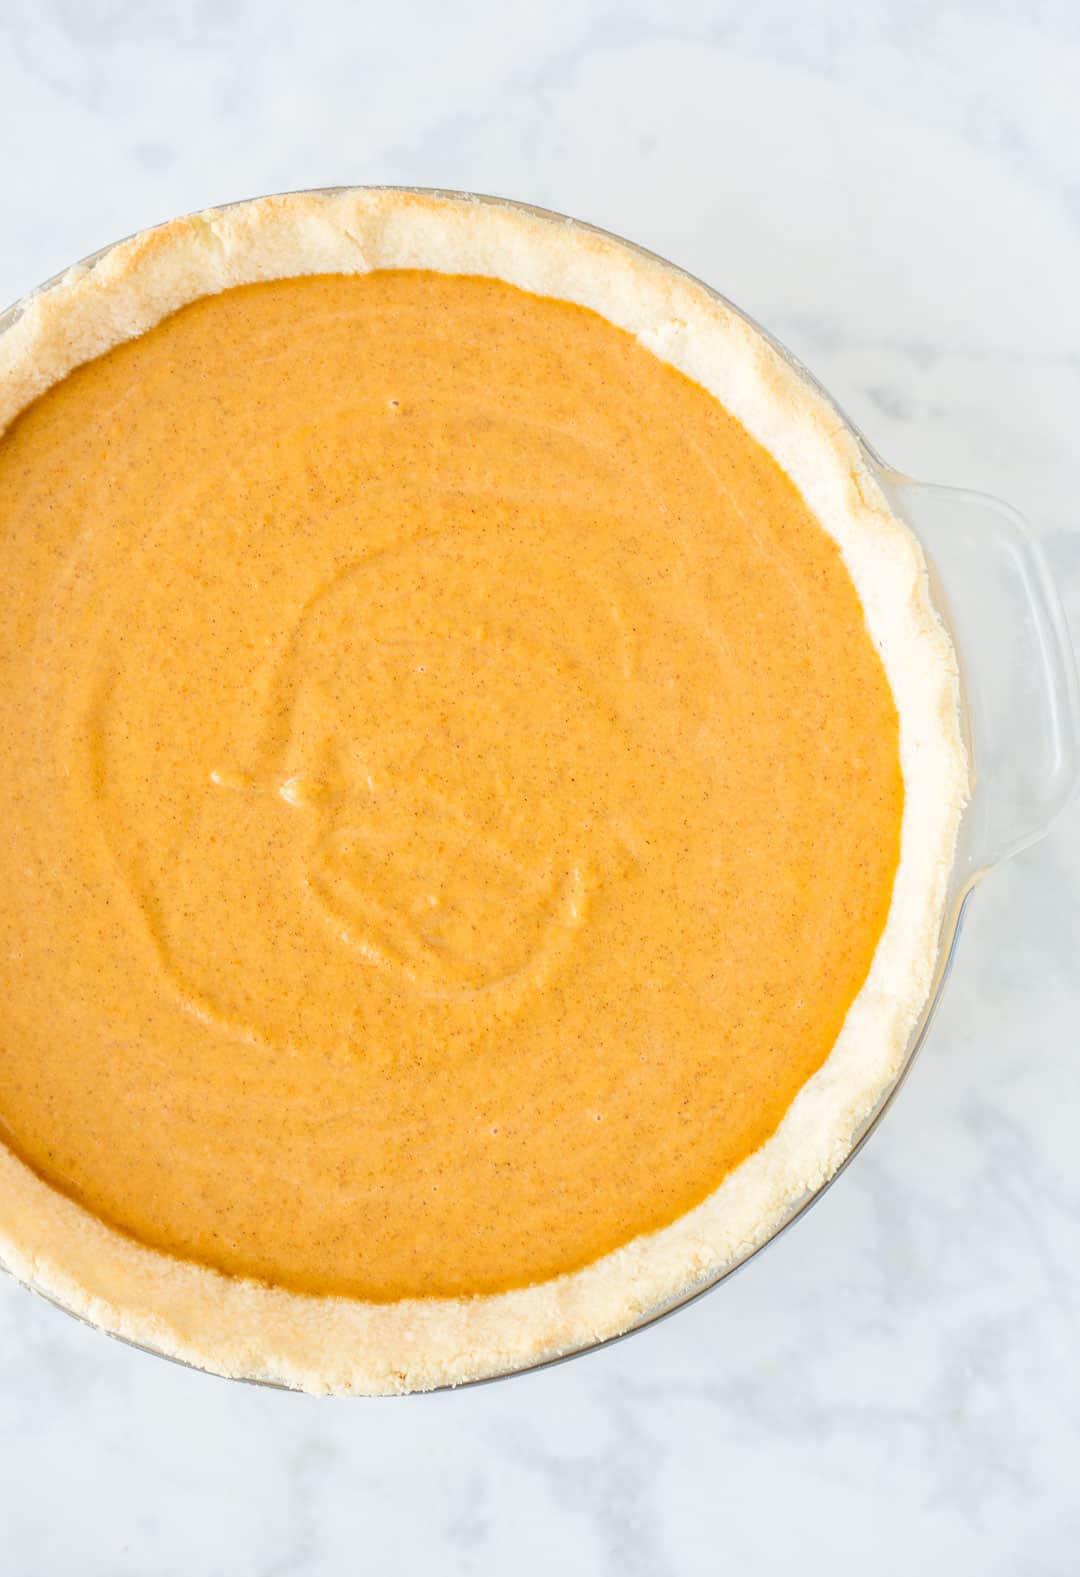 Pie crust filled with low-carb pumpkin pie filling